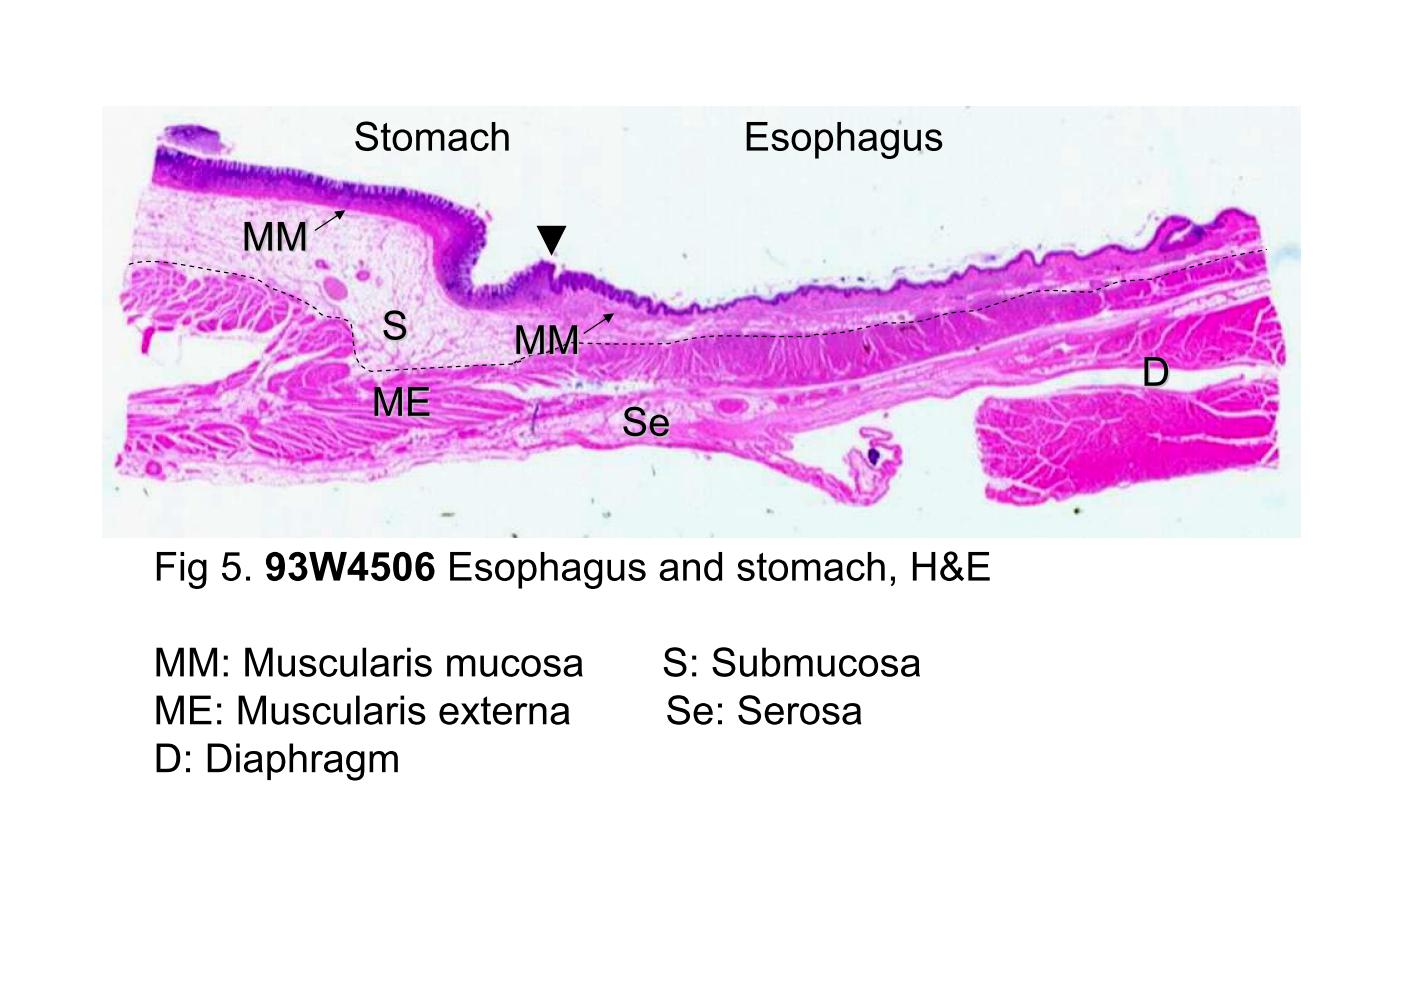 block10-1_13.jpg - Fig 5. 93W4506 Esophagus and stomach, H&E.The junction between the esophagus and stomach is shownhere. The esophagus is on the right, and the cardiac region ofthe stomach is on the left. The arrowhead shows the junction ofthem. The arrows point out the muscularis mucosa (MM) whichis continuous across the junction. The dashed line demonstratesthe boundary of the submucosa (S) and the muscularis externa(ME). The muscularis externa of the distal third esophagusconsists only of smooth muscle. [The skeletal muscle adjacentto the esophagus is the diaphragm (D).] Beneath the muscularisexterna is the serous membrane, serosa (Se), containingvessels and nerve fiber bundles.